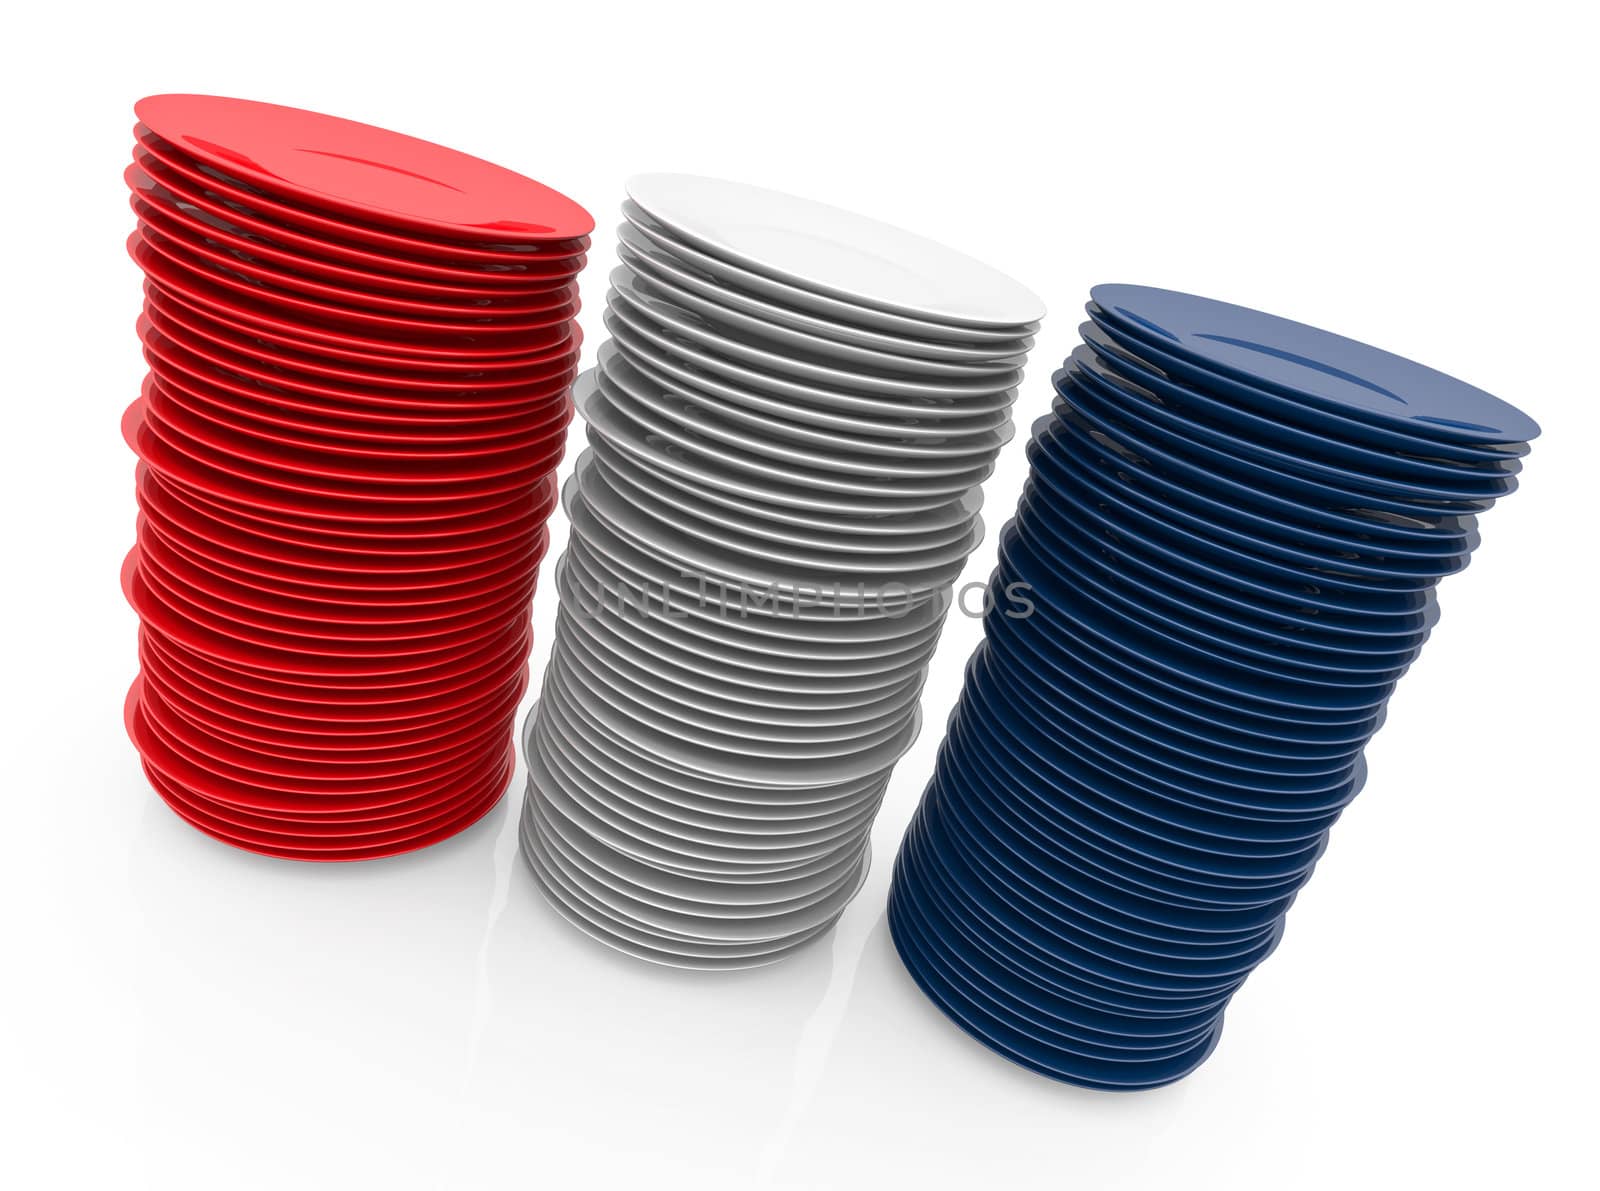 Three stacks of plates forming French flag. 3D rendered illustration.